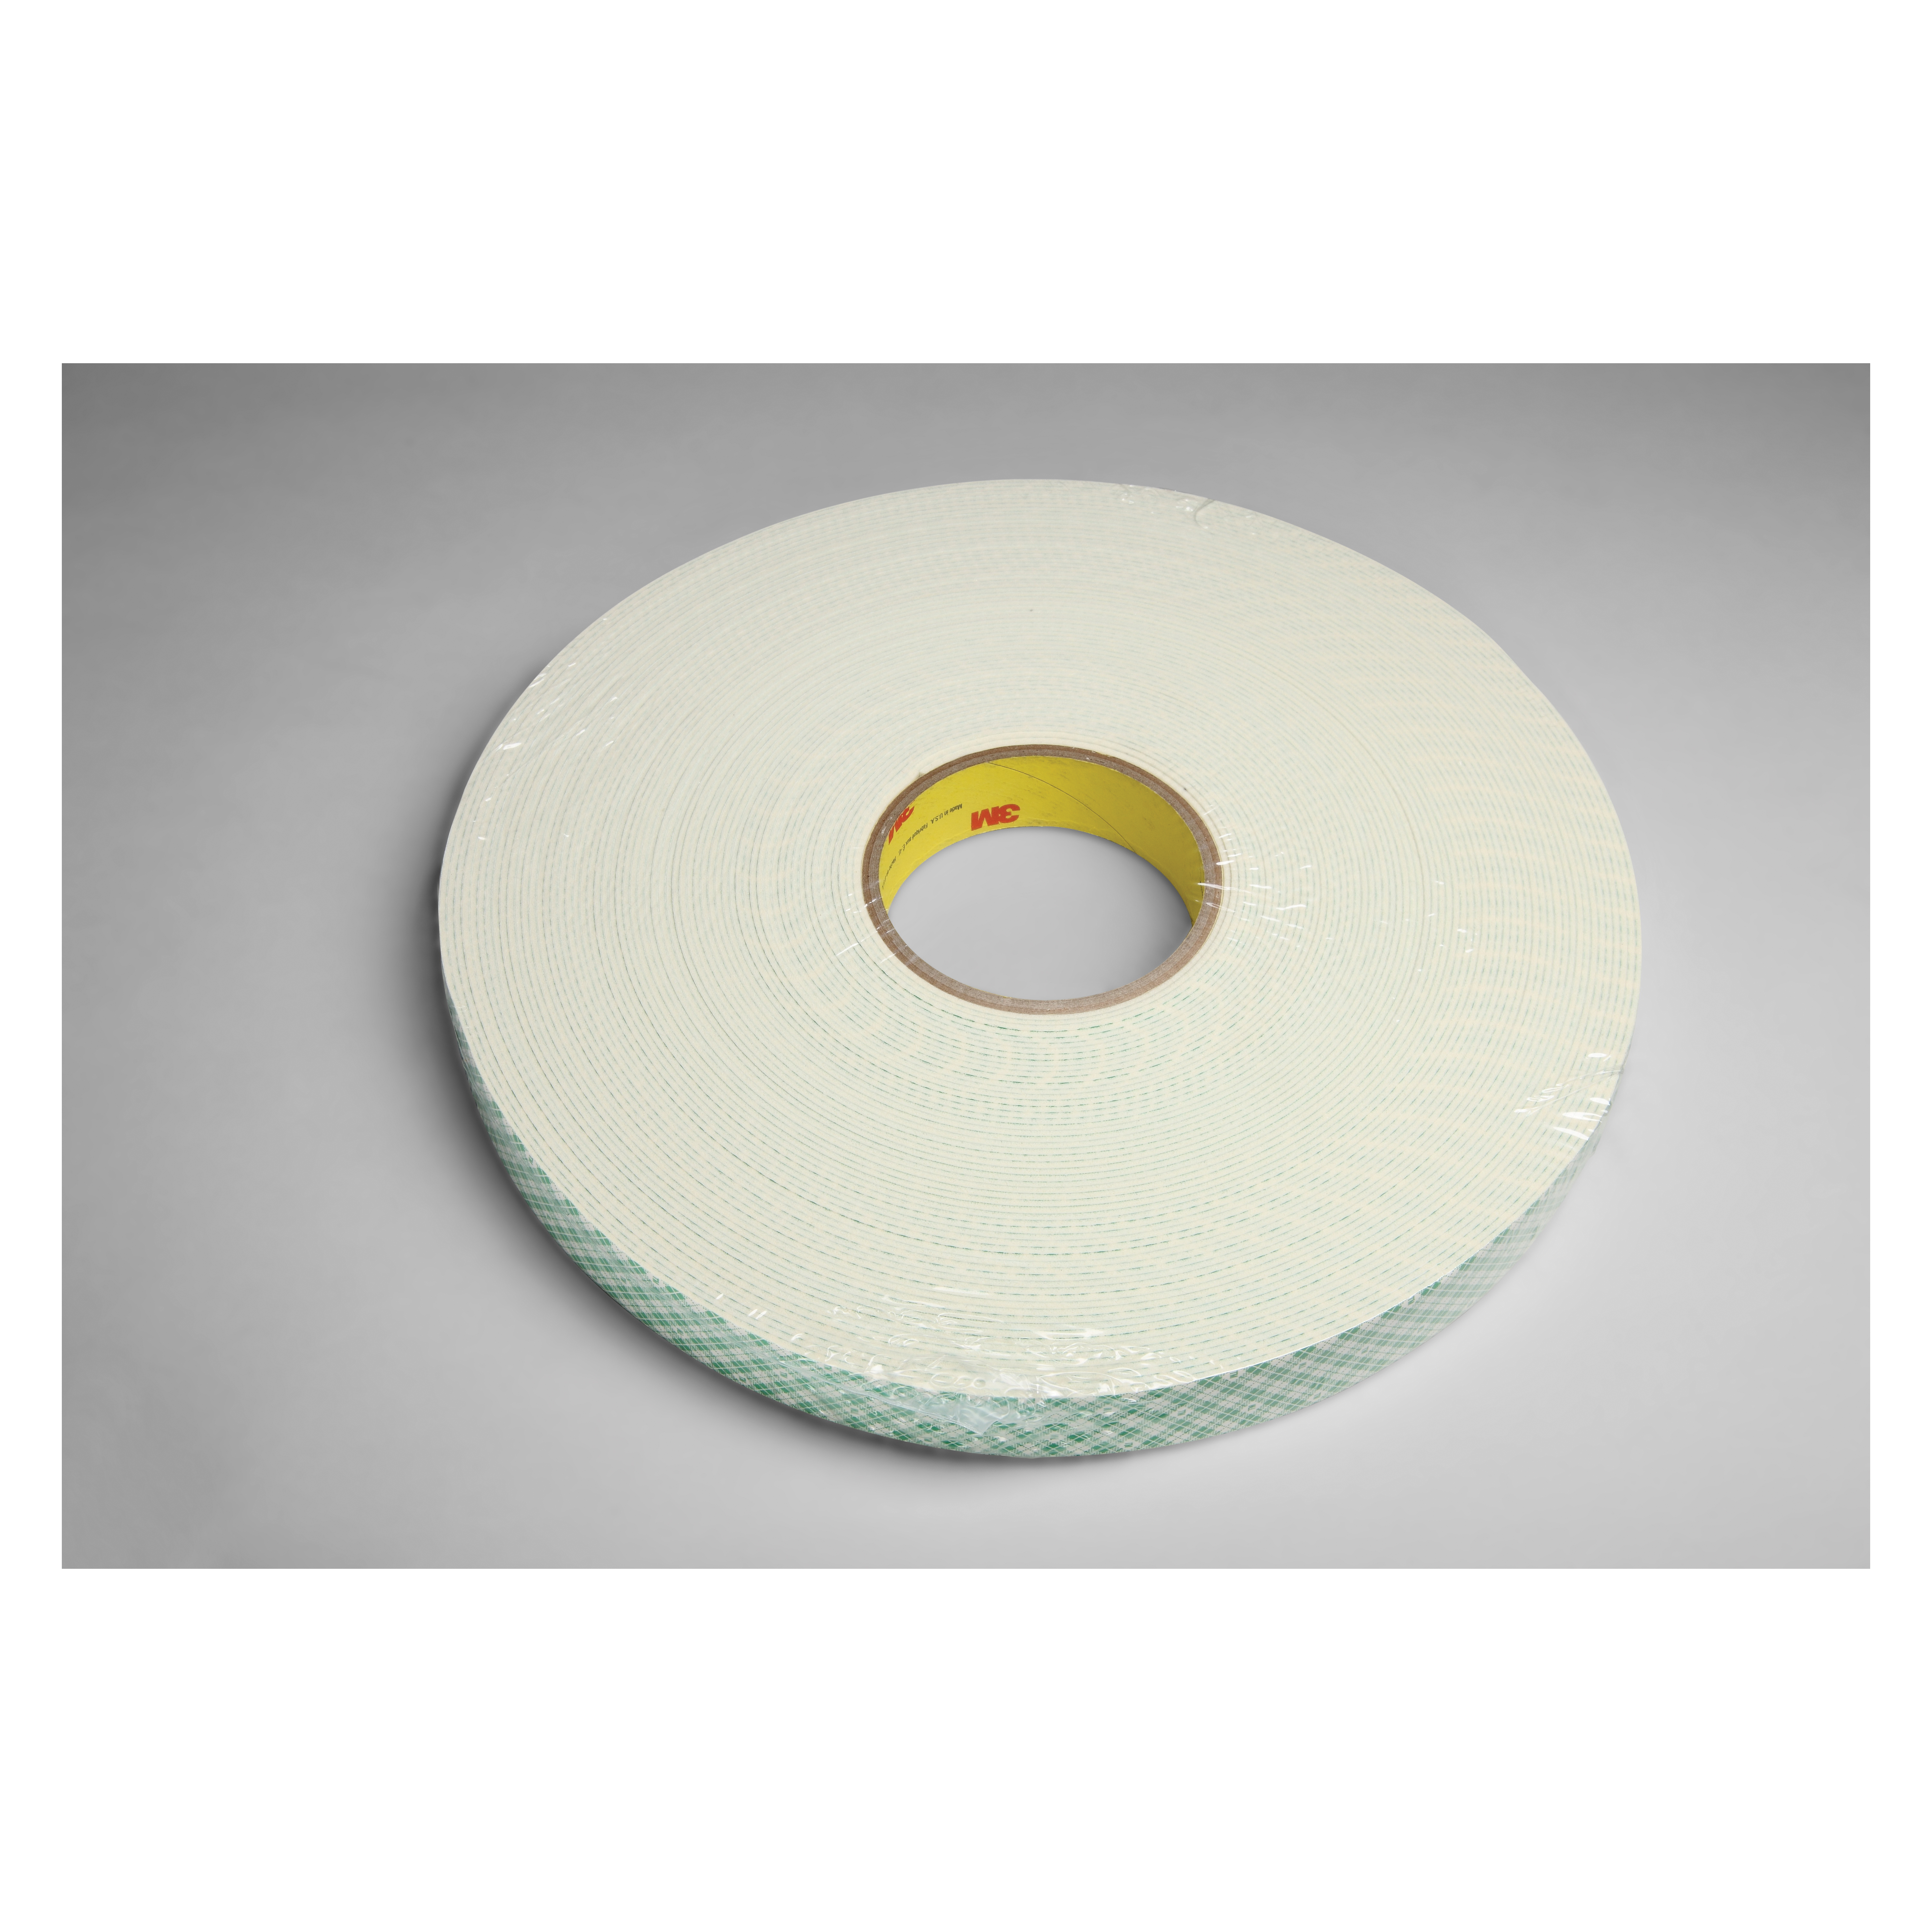 3M™ 021200-03400 Single Coated Foam Tape, 36 yd L x 1/2 in W, 62 mil THK, Acrylic Adhesive, Urethane Foam Backing, Natural